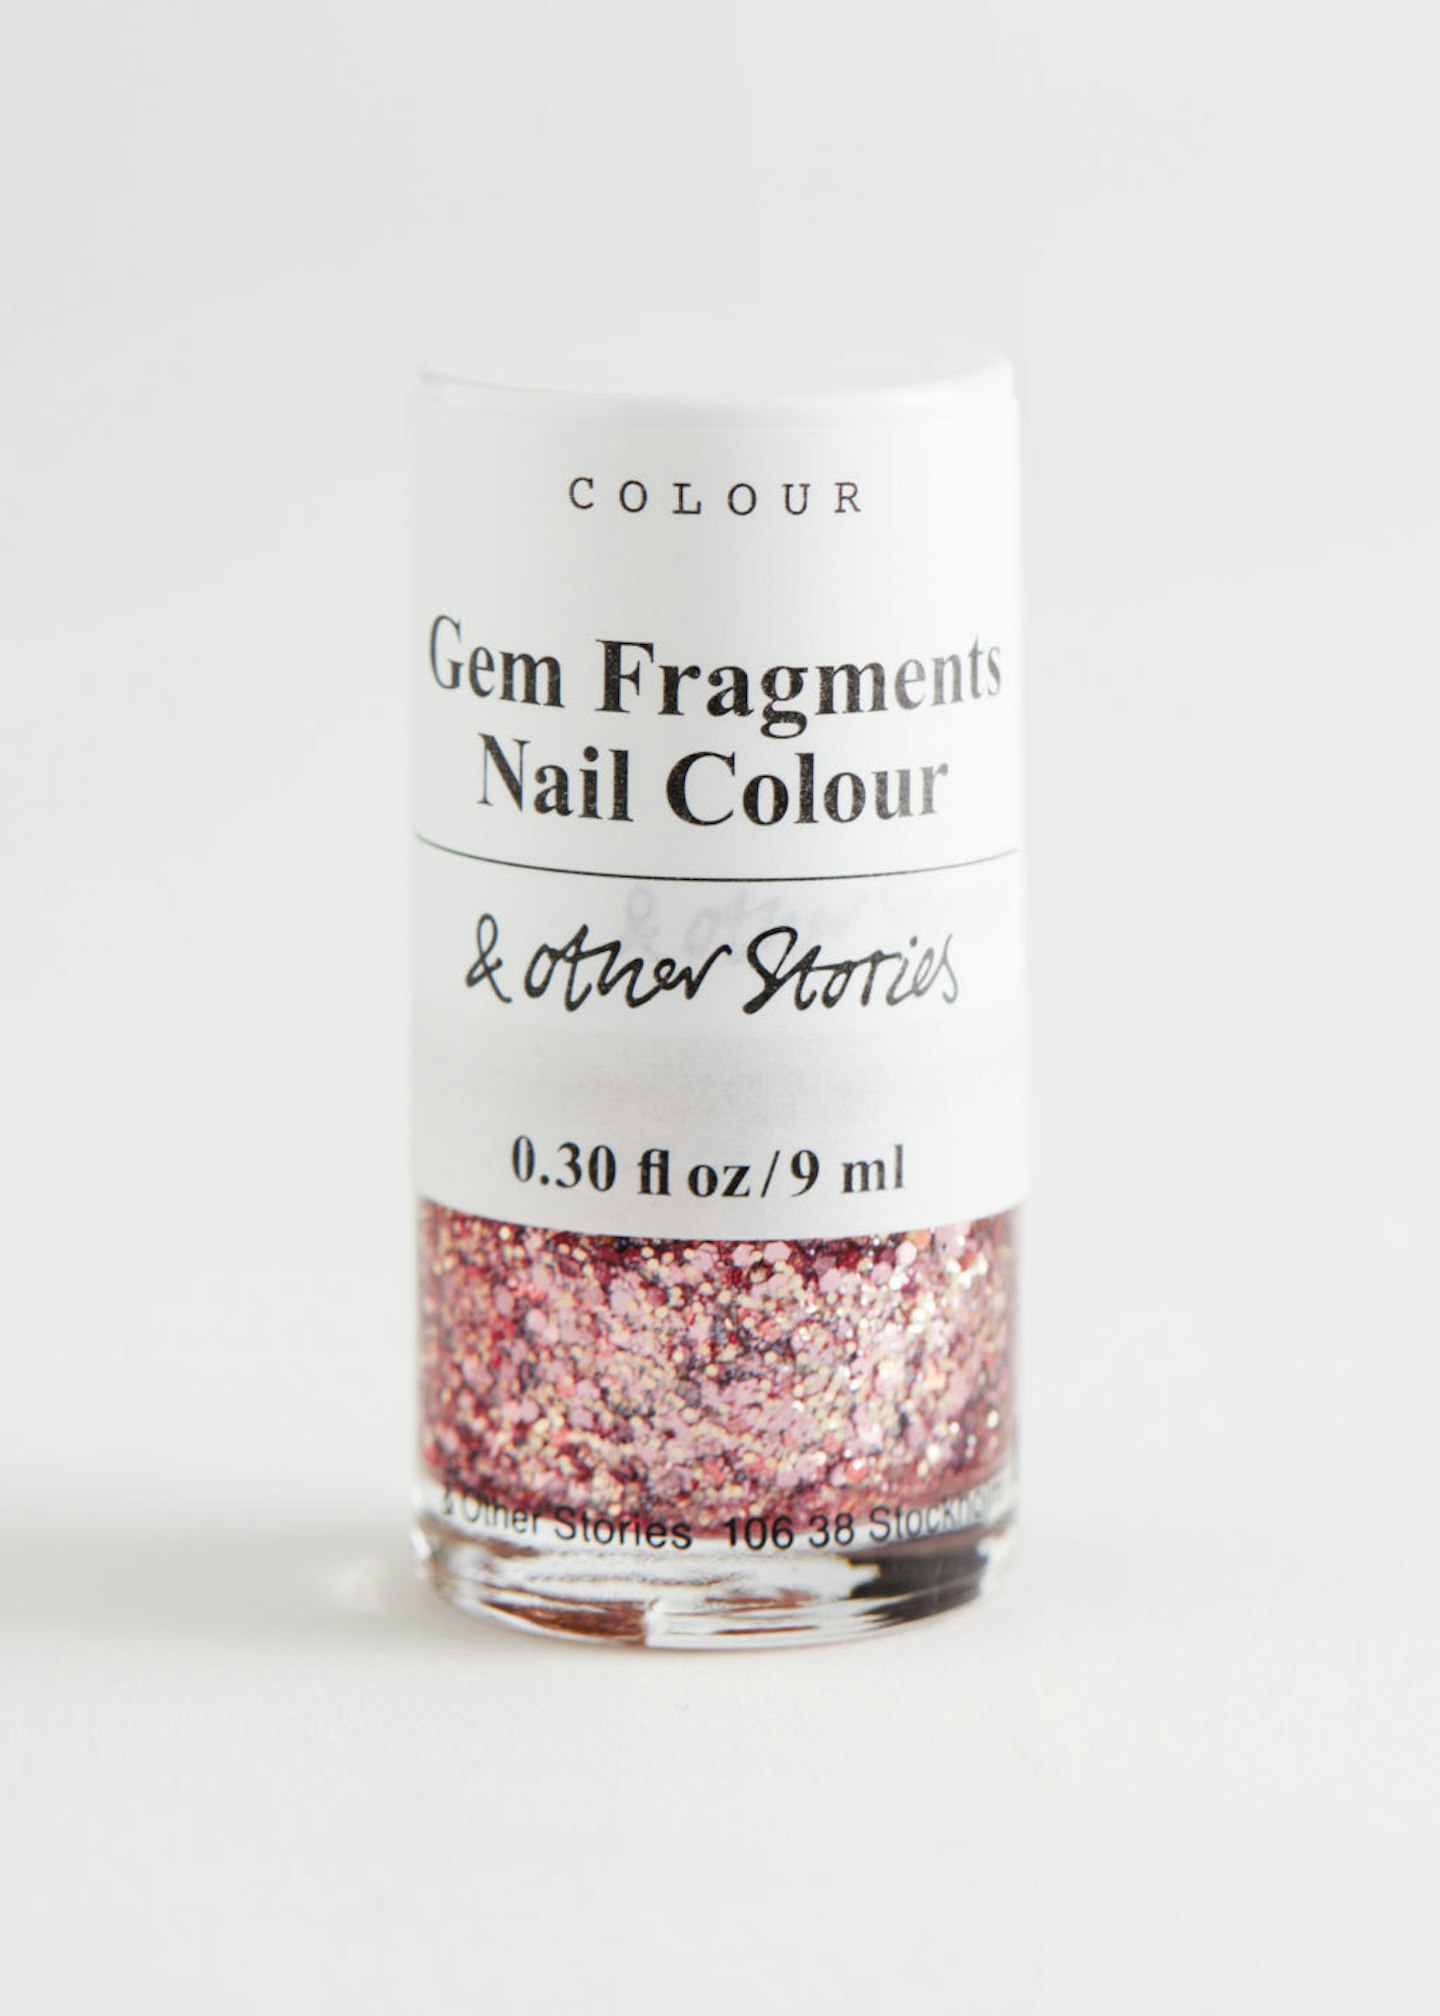 & Other Stories Gem Fragments Nail Colour